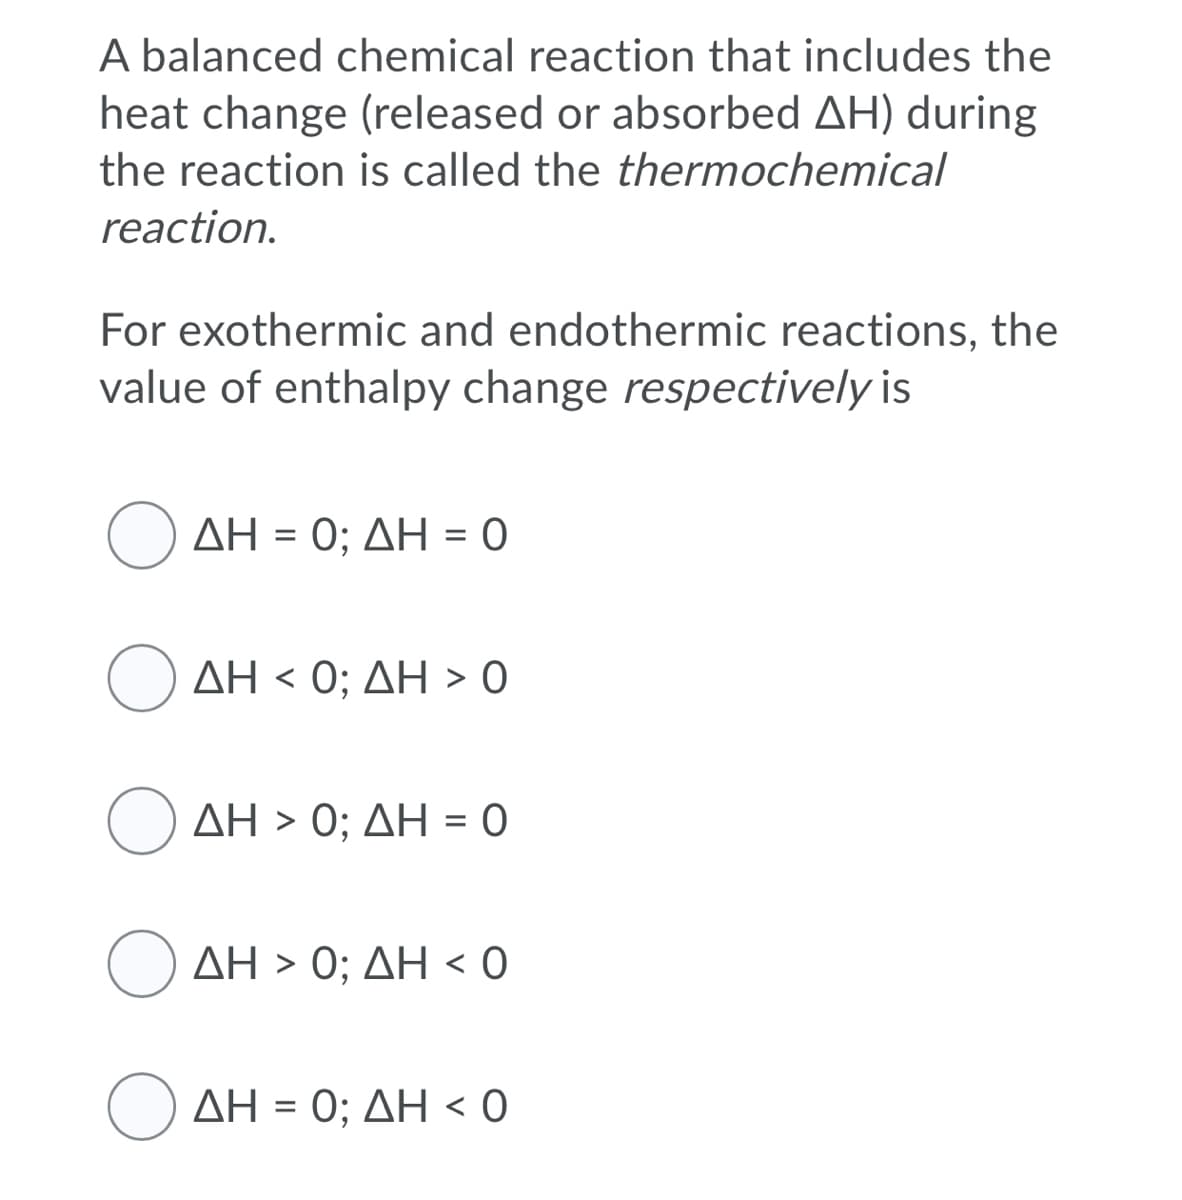 A balanced chemical reaction that includes the
heat change (released or absorbed AH) during
the reaction is called the thermochemical
reaction.
For exothermic and endothermic reactions, the
value of enthalpy change respectively is
(ΔΗ- 0; ΔΗ-0
ΔΗ< 0; ΔΗ > 0
ΔΗ >0; ΔΗ - 0
()ΔΗ > 0; ΔΗ < 0
( ΔΗ - 0; ΔΗ < 0
